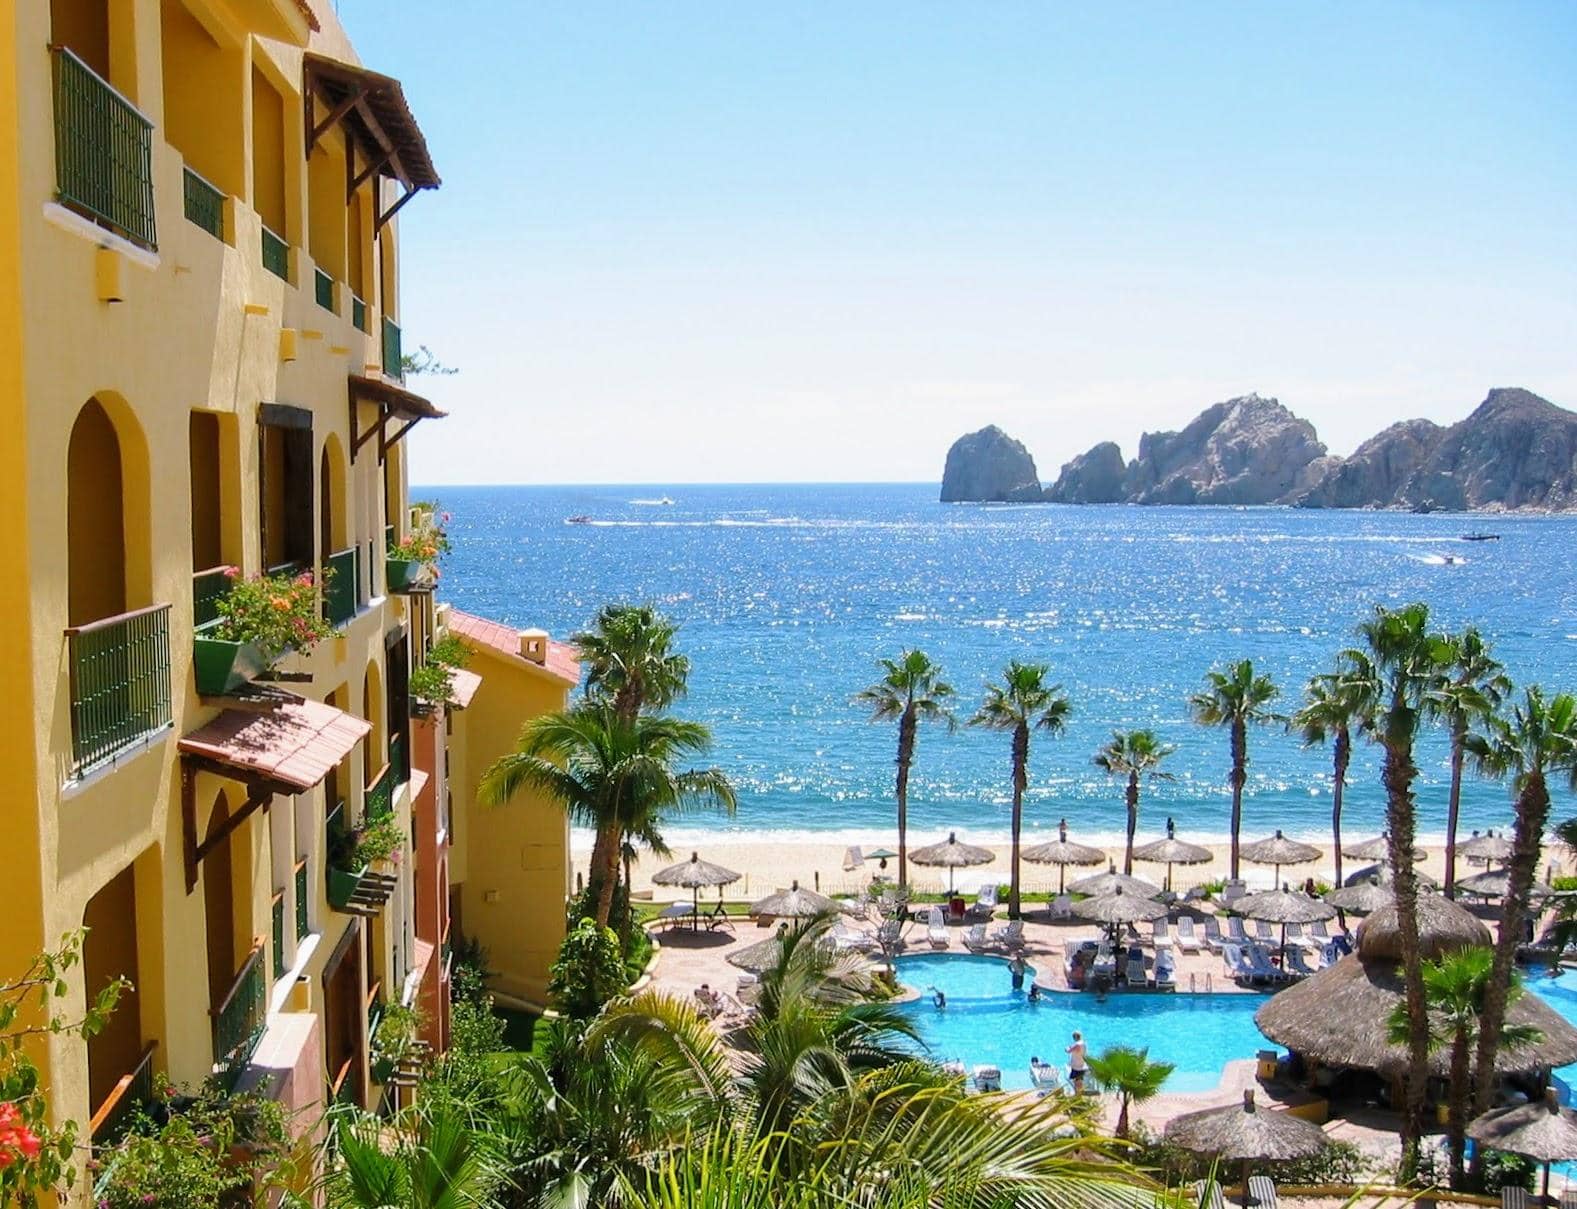 Cabo San Lucas: A spectacular paradise we’ll probably never go back to.